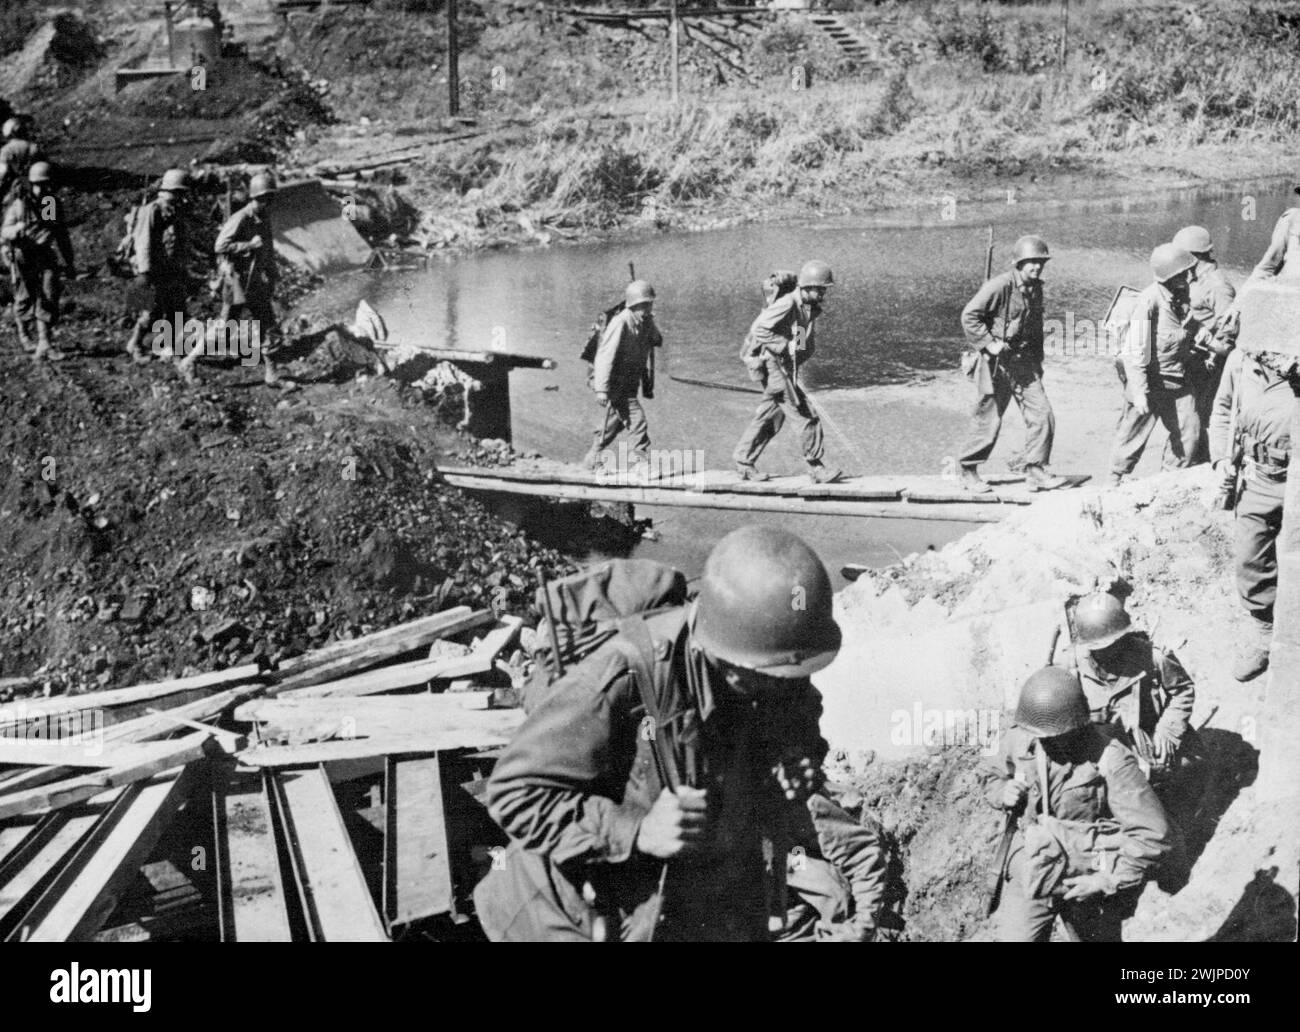 U.S. Soldiers cross a French Canal -- U.S. infantrymen file across an improvised footbridge over a canal in France to push toward the Moselle River and the German border. By September 21, 1944, American troops had penetrated the German border in at least seven places, while Allied airborne and ground forces in Holland were threatening to flank the northern end of the enemy defense line. October 9, 1944. Stock Photo